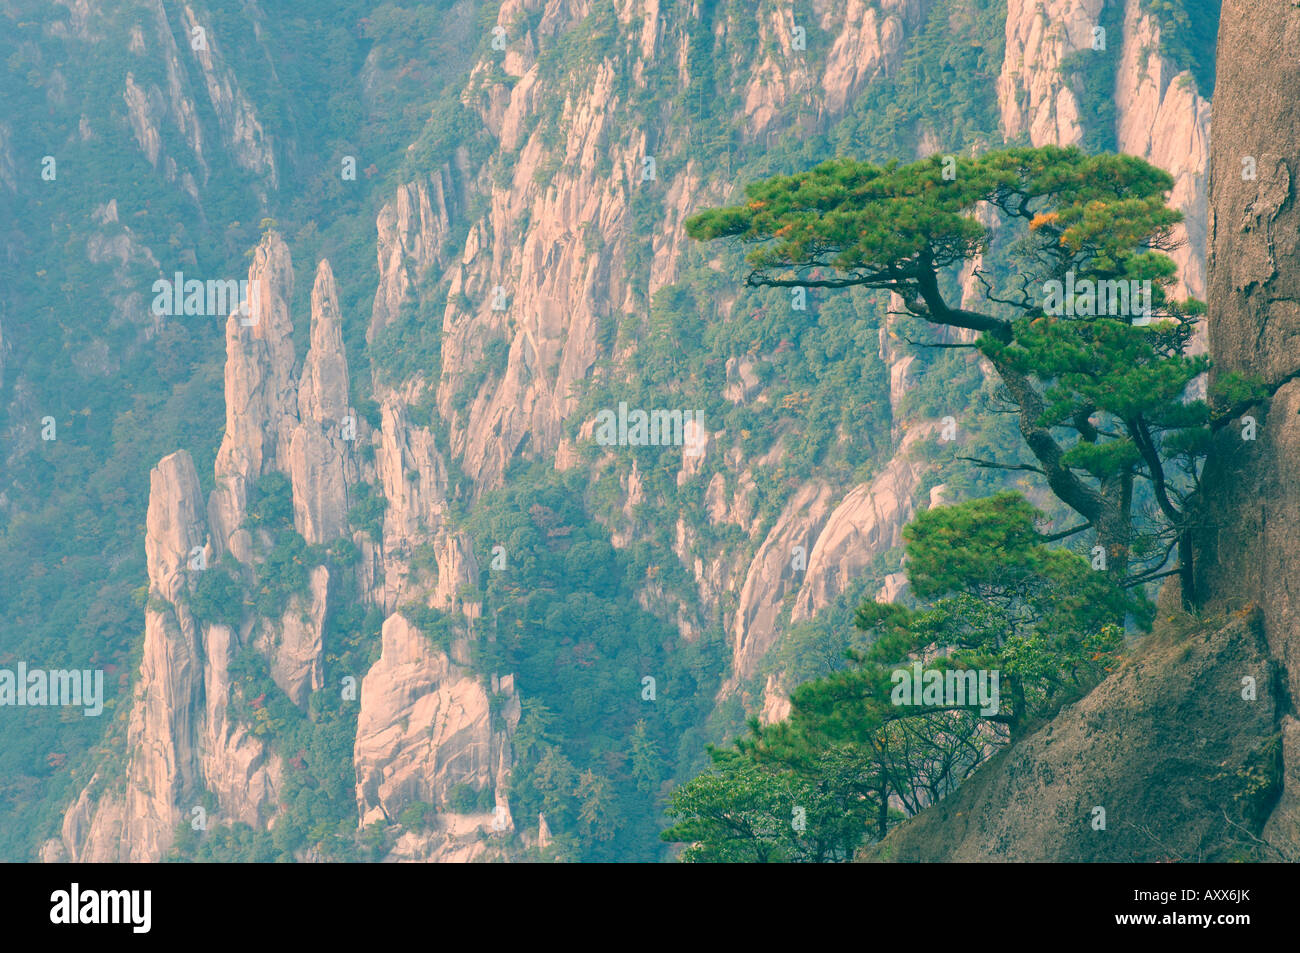 Rocks and pine trees, White Cloud scenic area, Huang Shan (Yellow Mountain), UNESCO World Heritage Site, Anhui Province, China Stock Photo